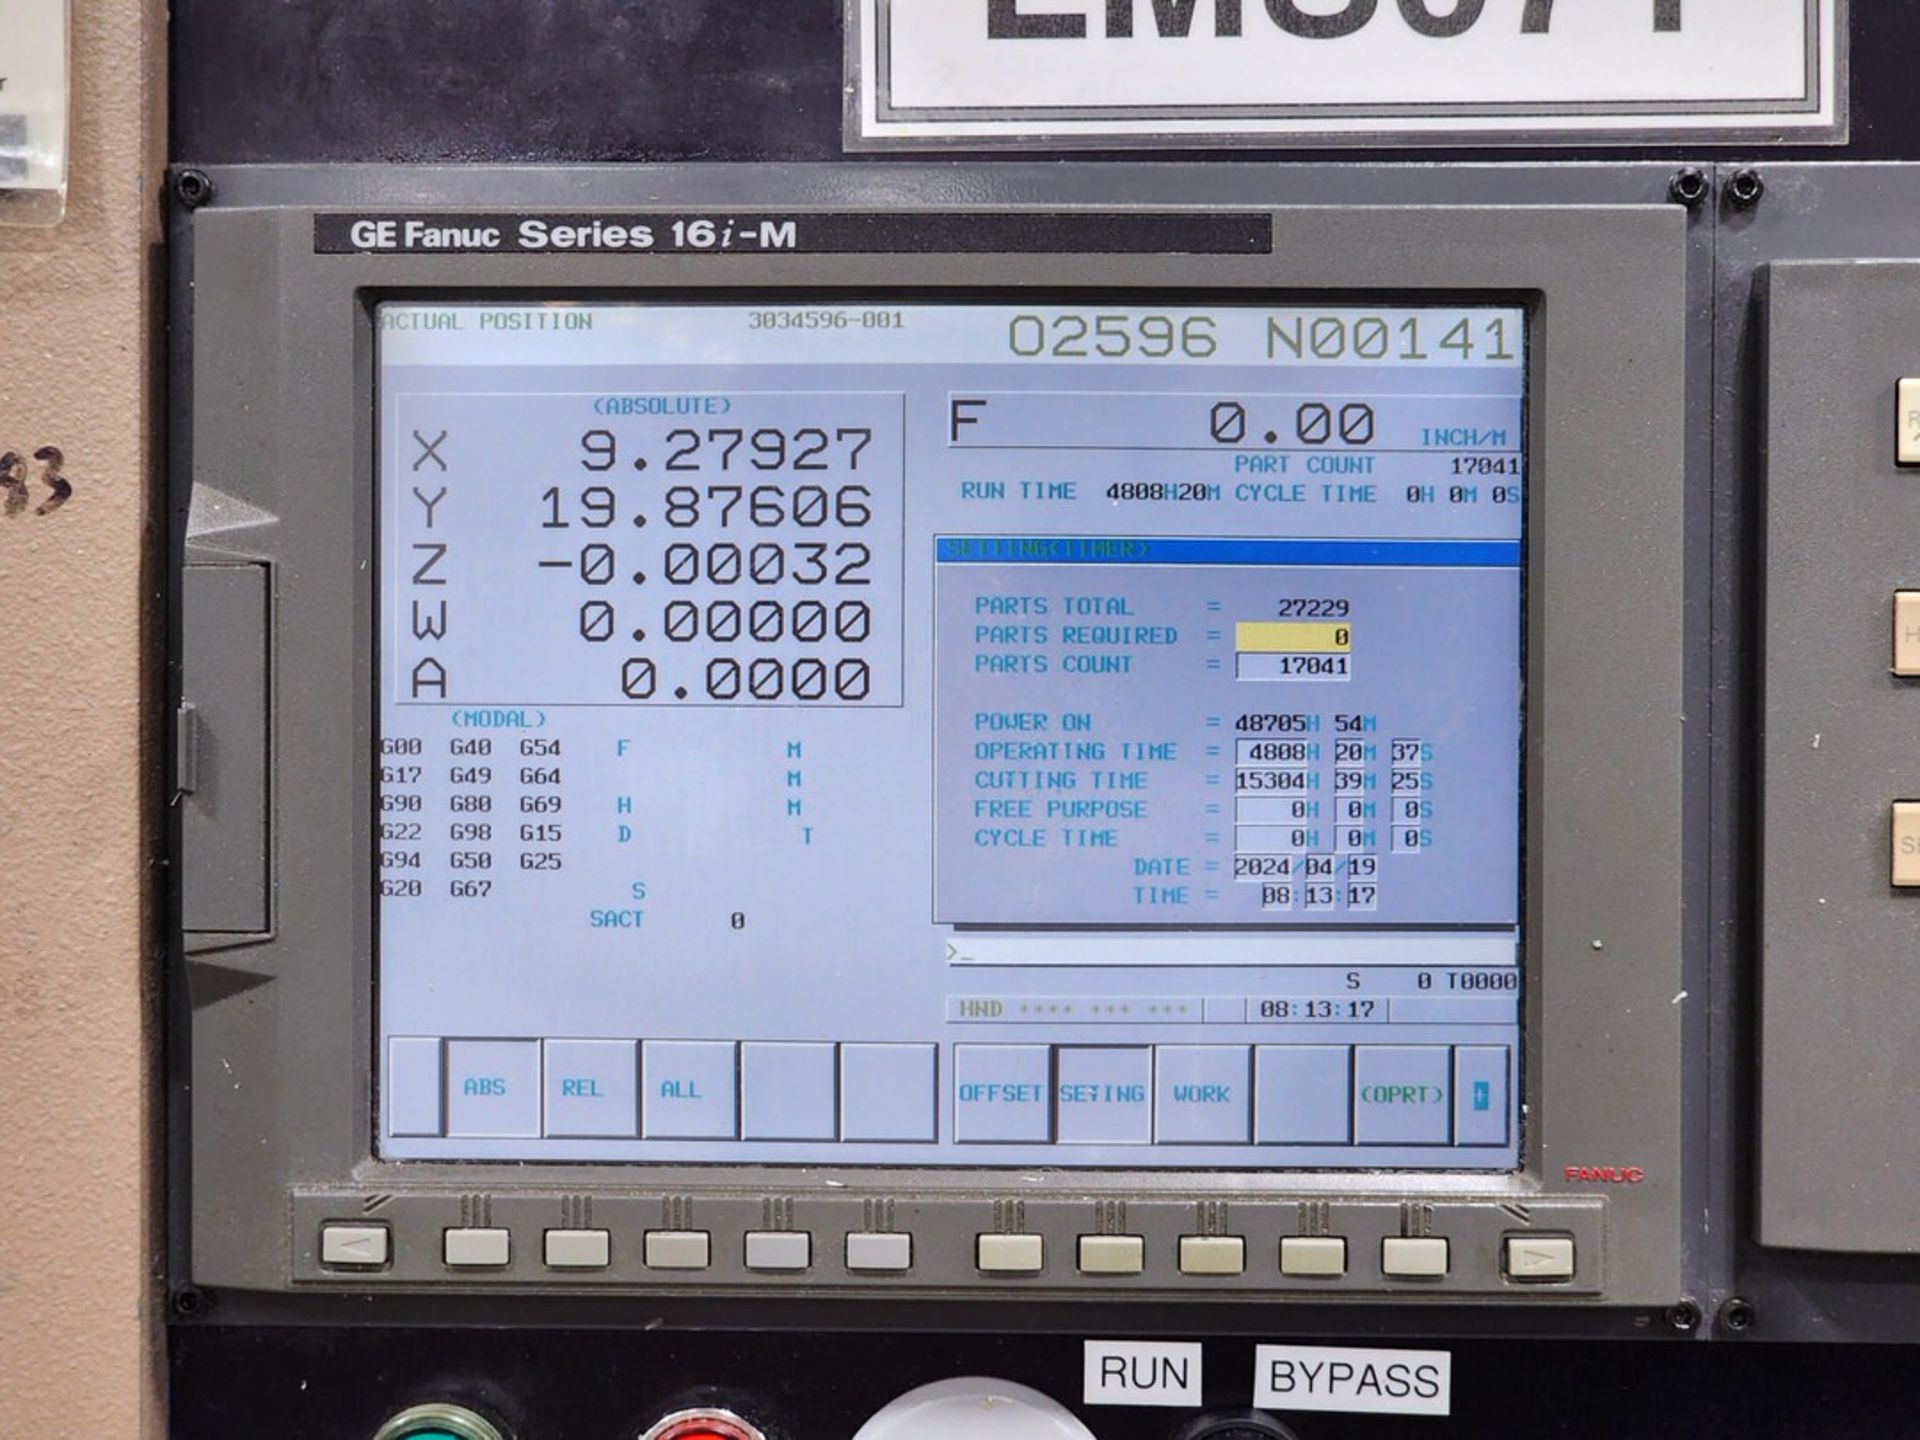 SIP SIP-640 Jig Boring Machine W/ Fanuc Series 16i-M Controller; Cutting Time: 15,304hrs - Image 20 of 36